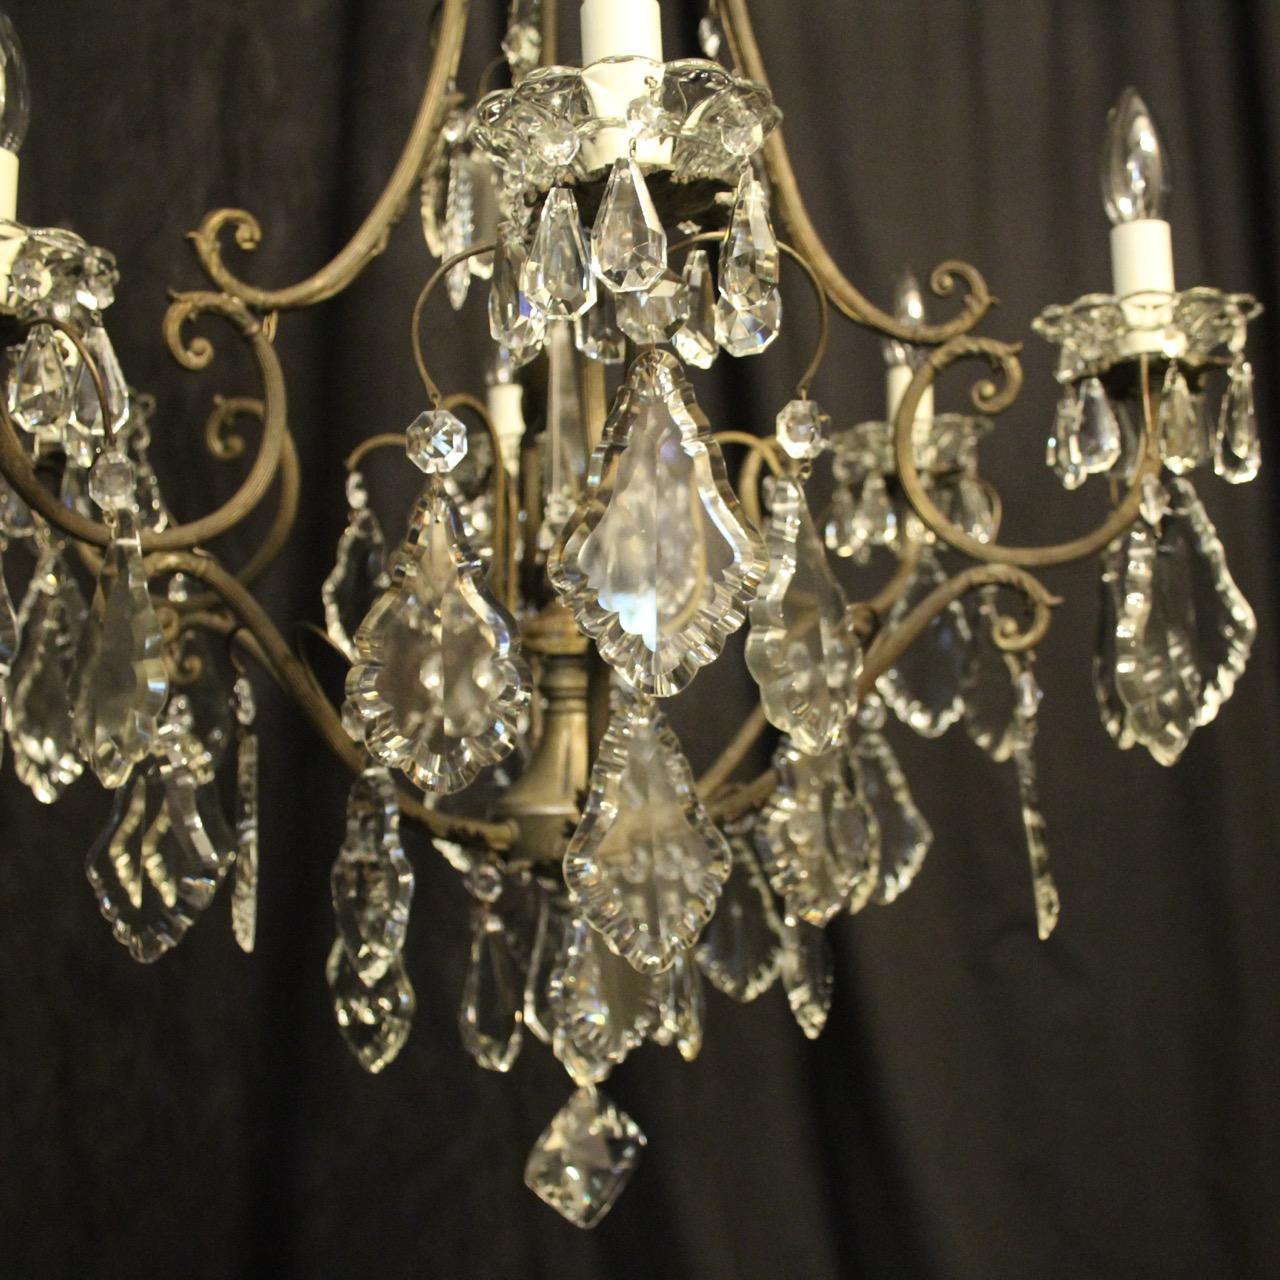 A French dark gilded brass and crystal 7-light birdcage form antique chandelier, the 6 reeded scrolling arms with glass bobeches drip pans, issuing from an foliated cage form interior with a single inverted light fitting and large prismatic spike